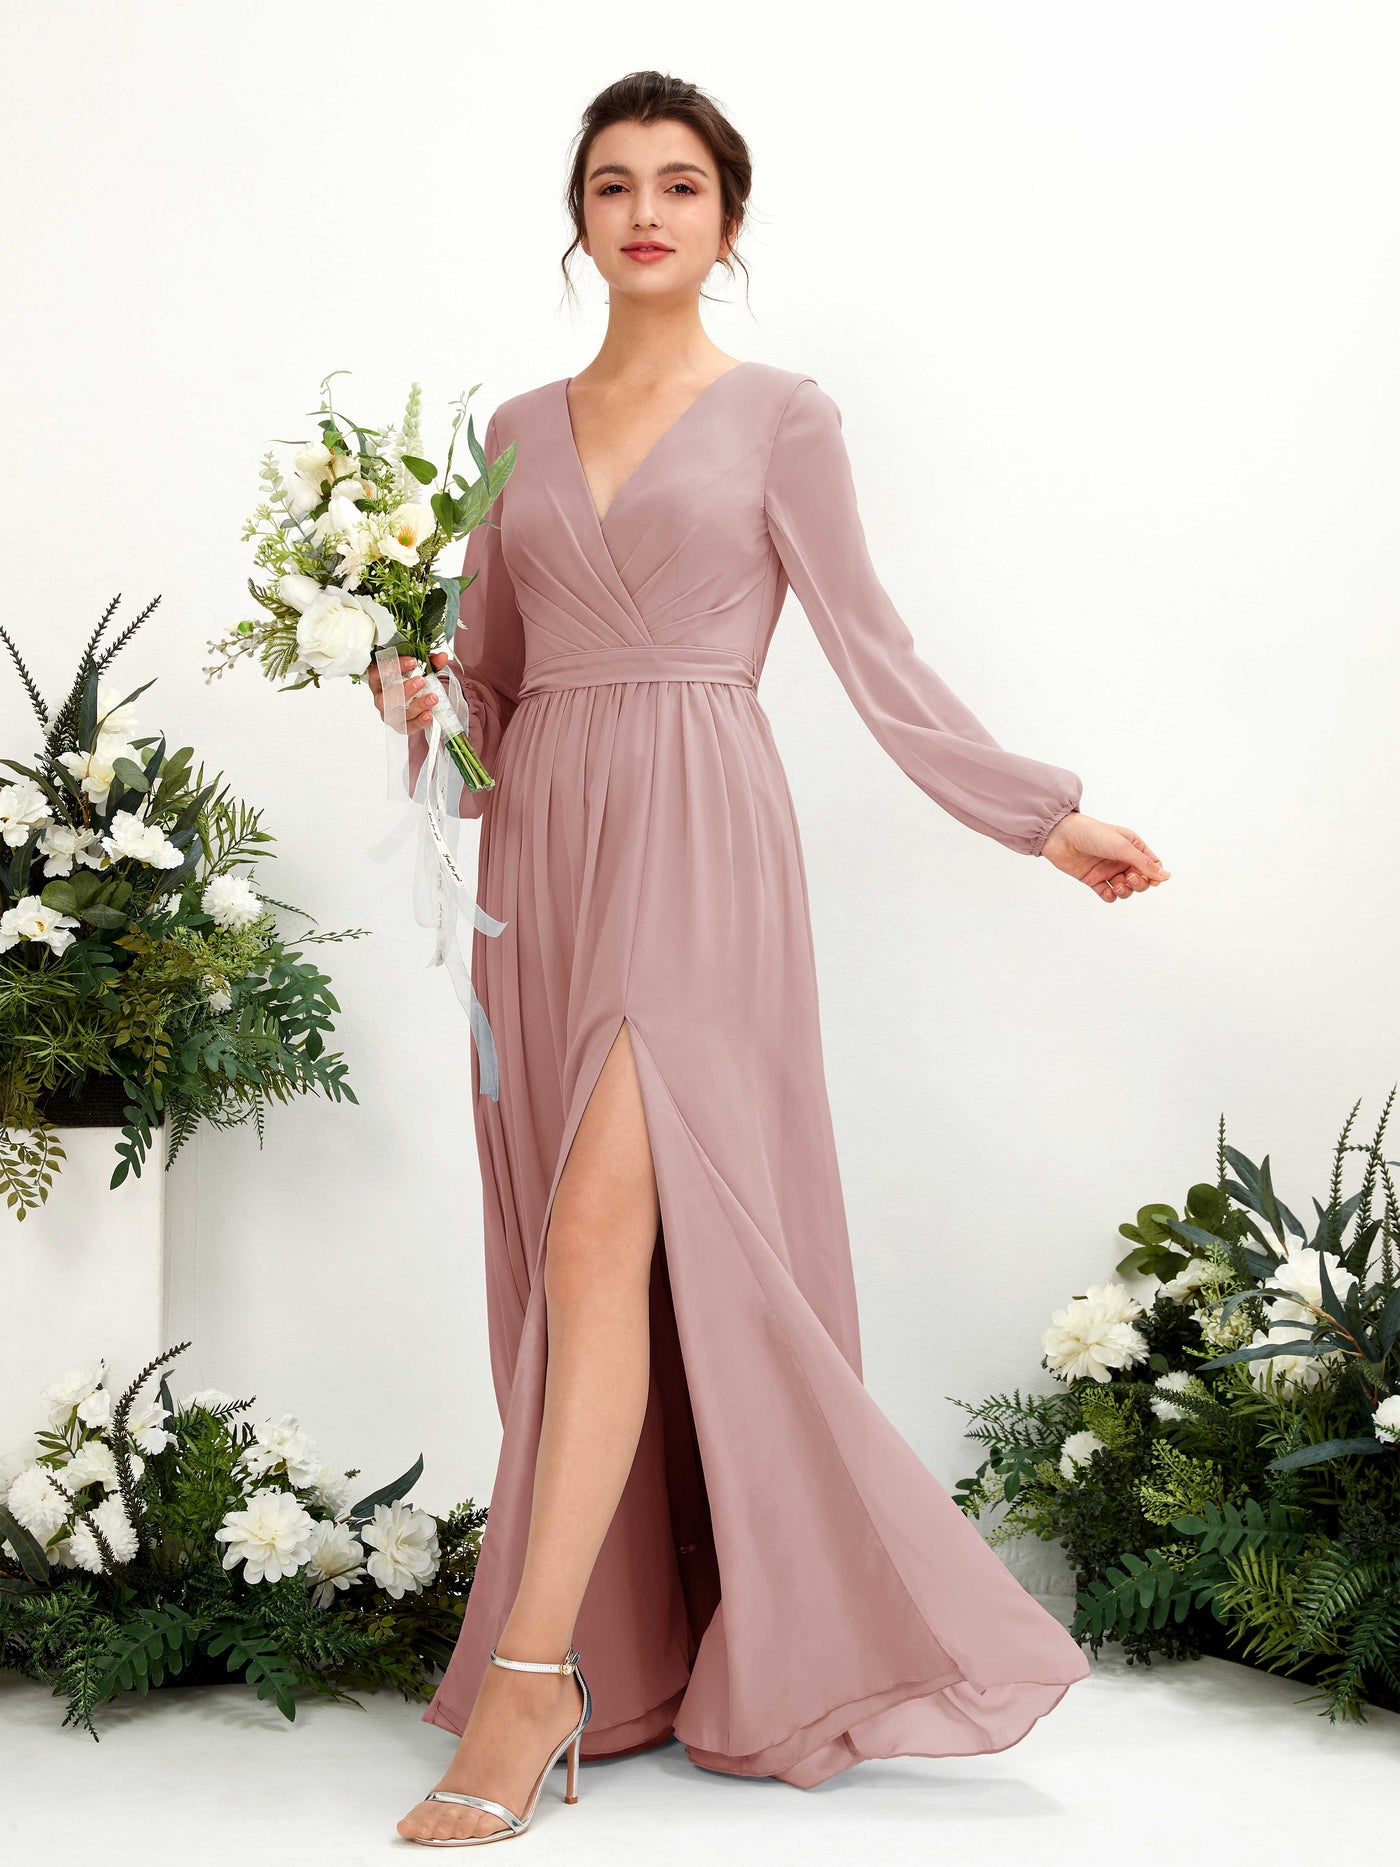 Dusty Rose Bridesmaid Dresses Bridesmaid Dress A-line Chiffon V-neck Full Length Long Sleeves Wedding Party Dress (81223809)#color_dusty-rose